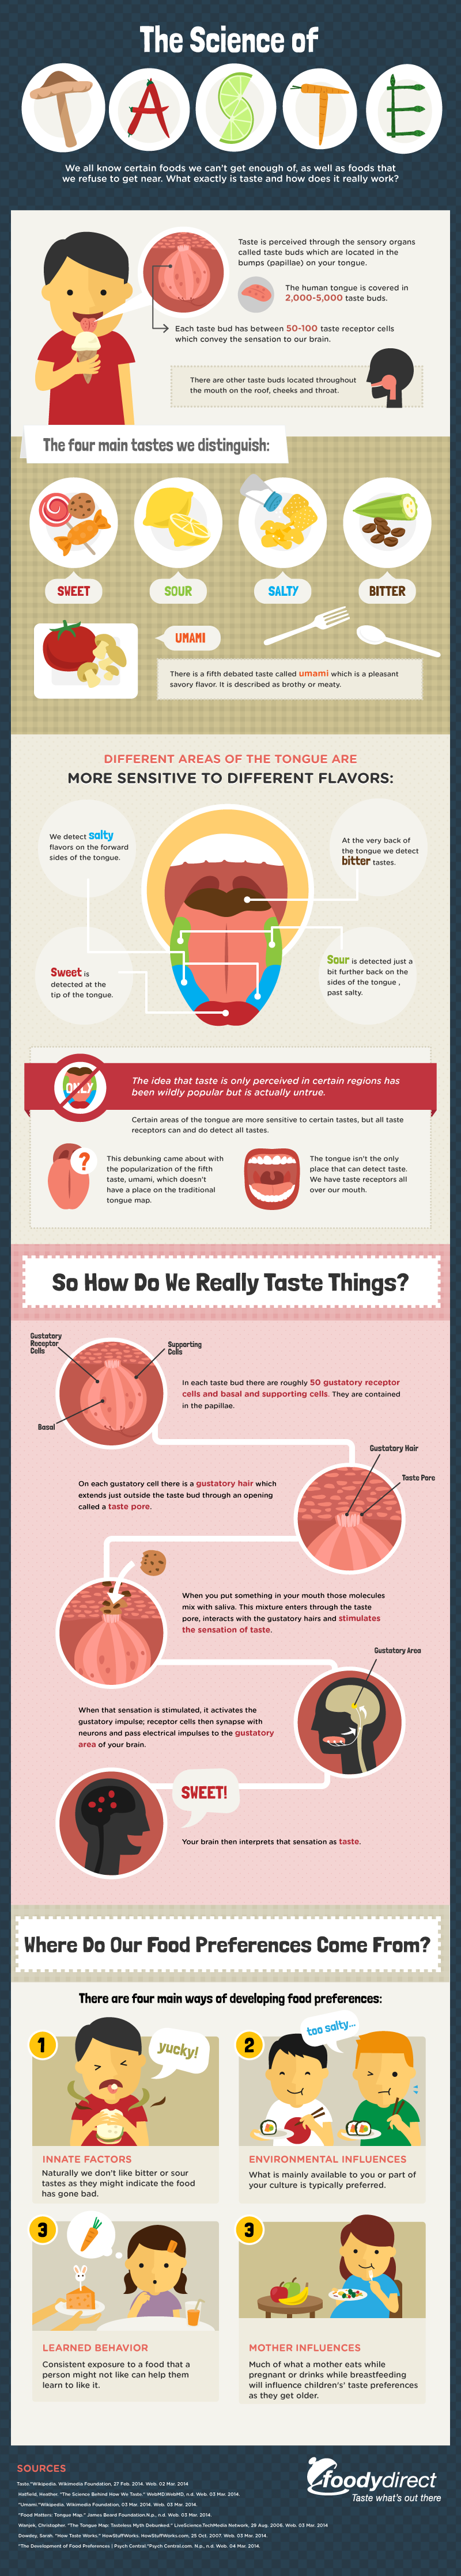 Infographic: The Science of Taste #infographic